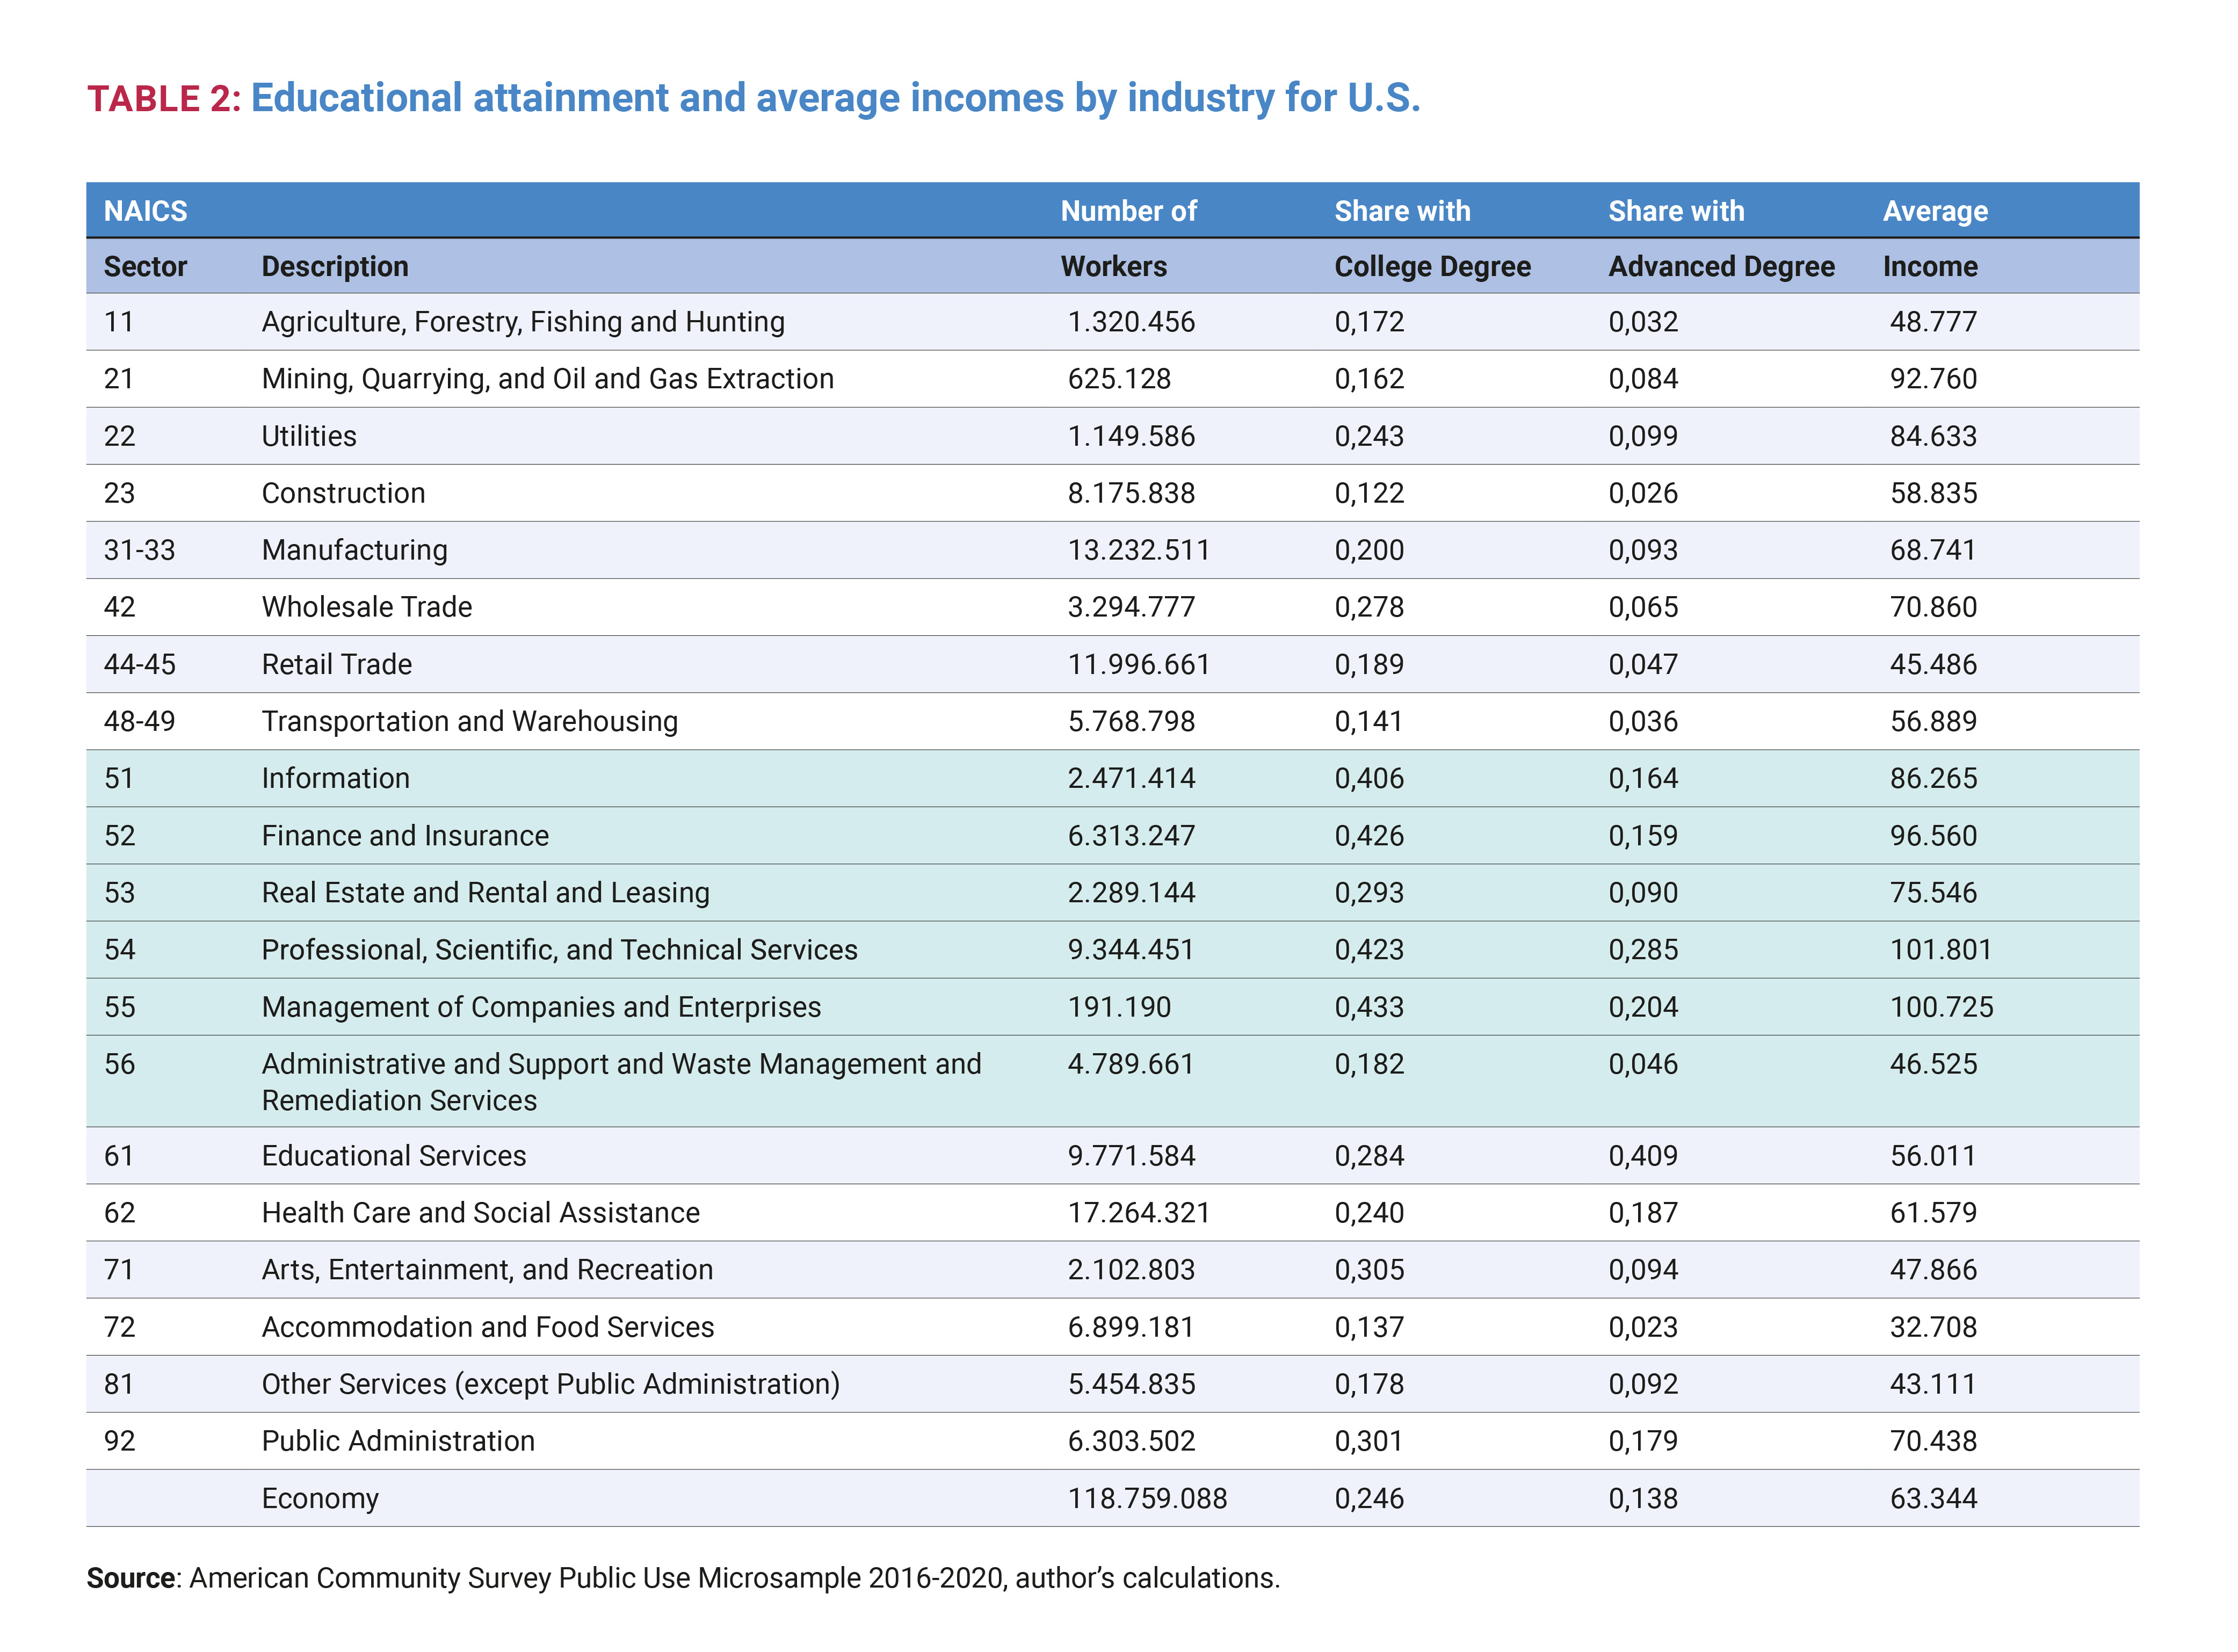 Educational attainment and average incomes by industry for U.S.